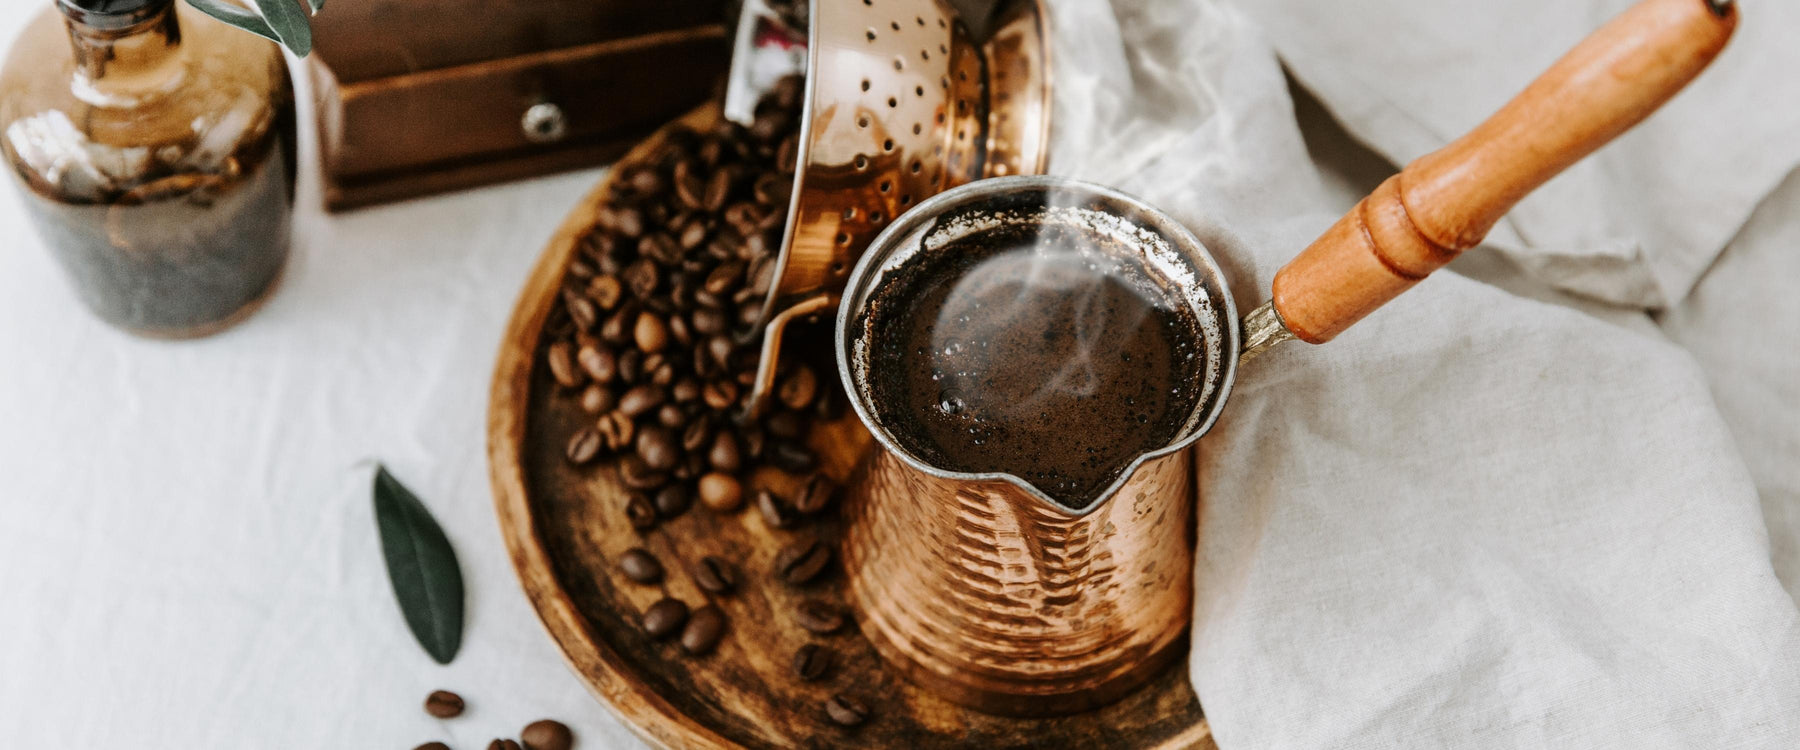 What are the benefits of Turkish Coffee? How Many Cups Should Be Consumed Per Day?